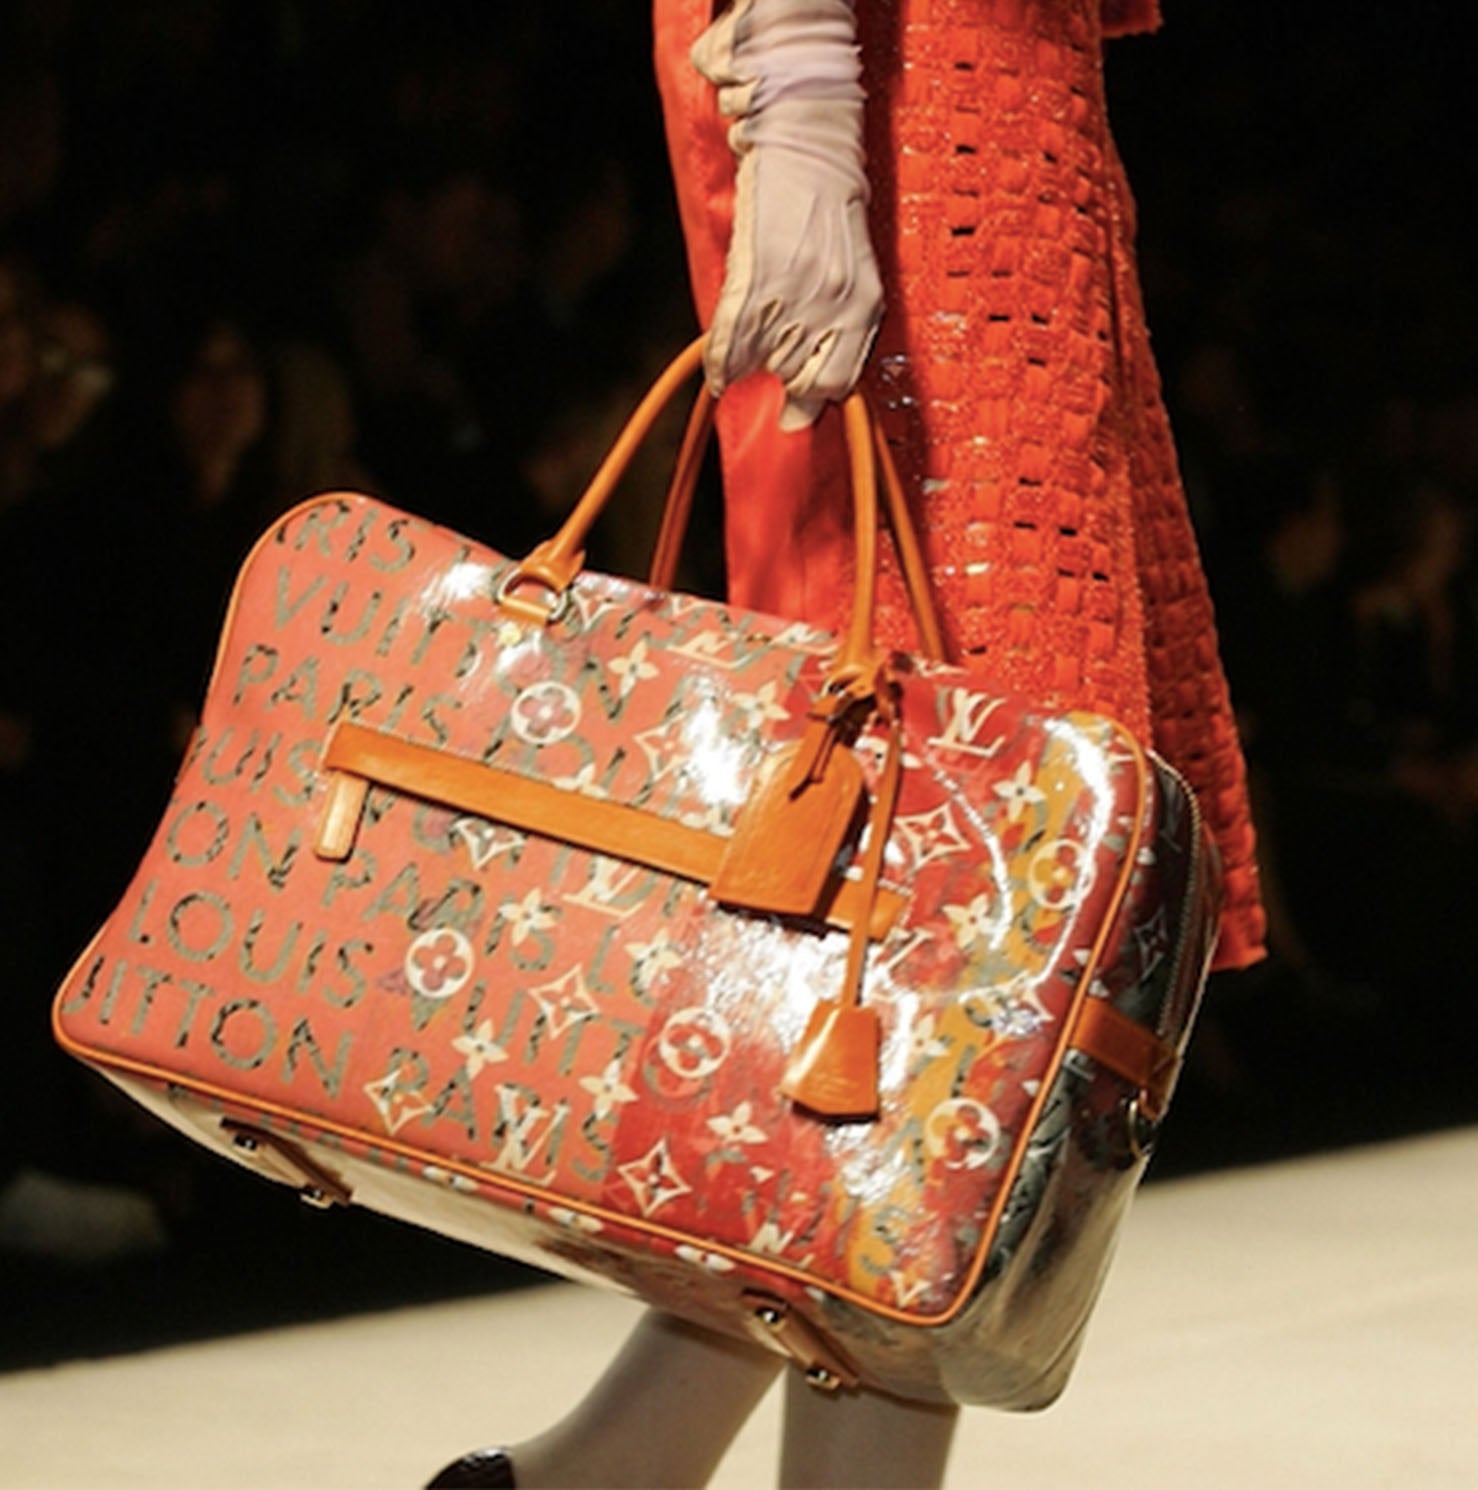 Models hold Louis Vuitton bags designed by Richard Prince at the